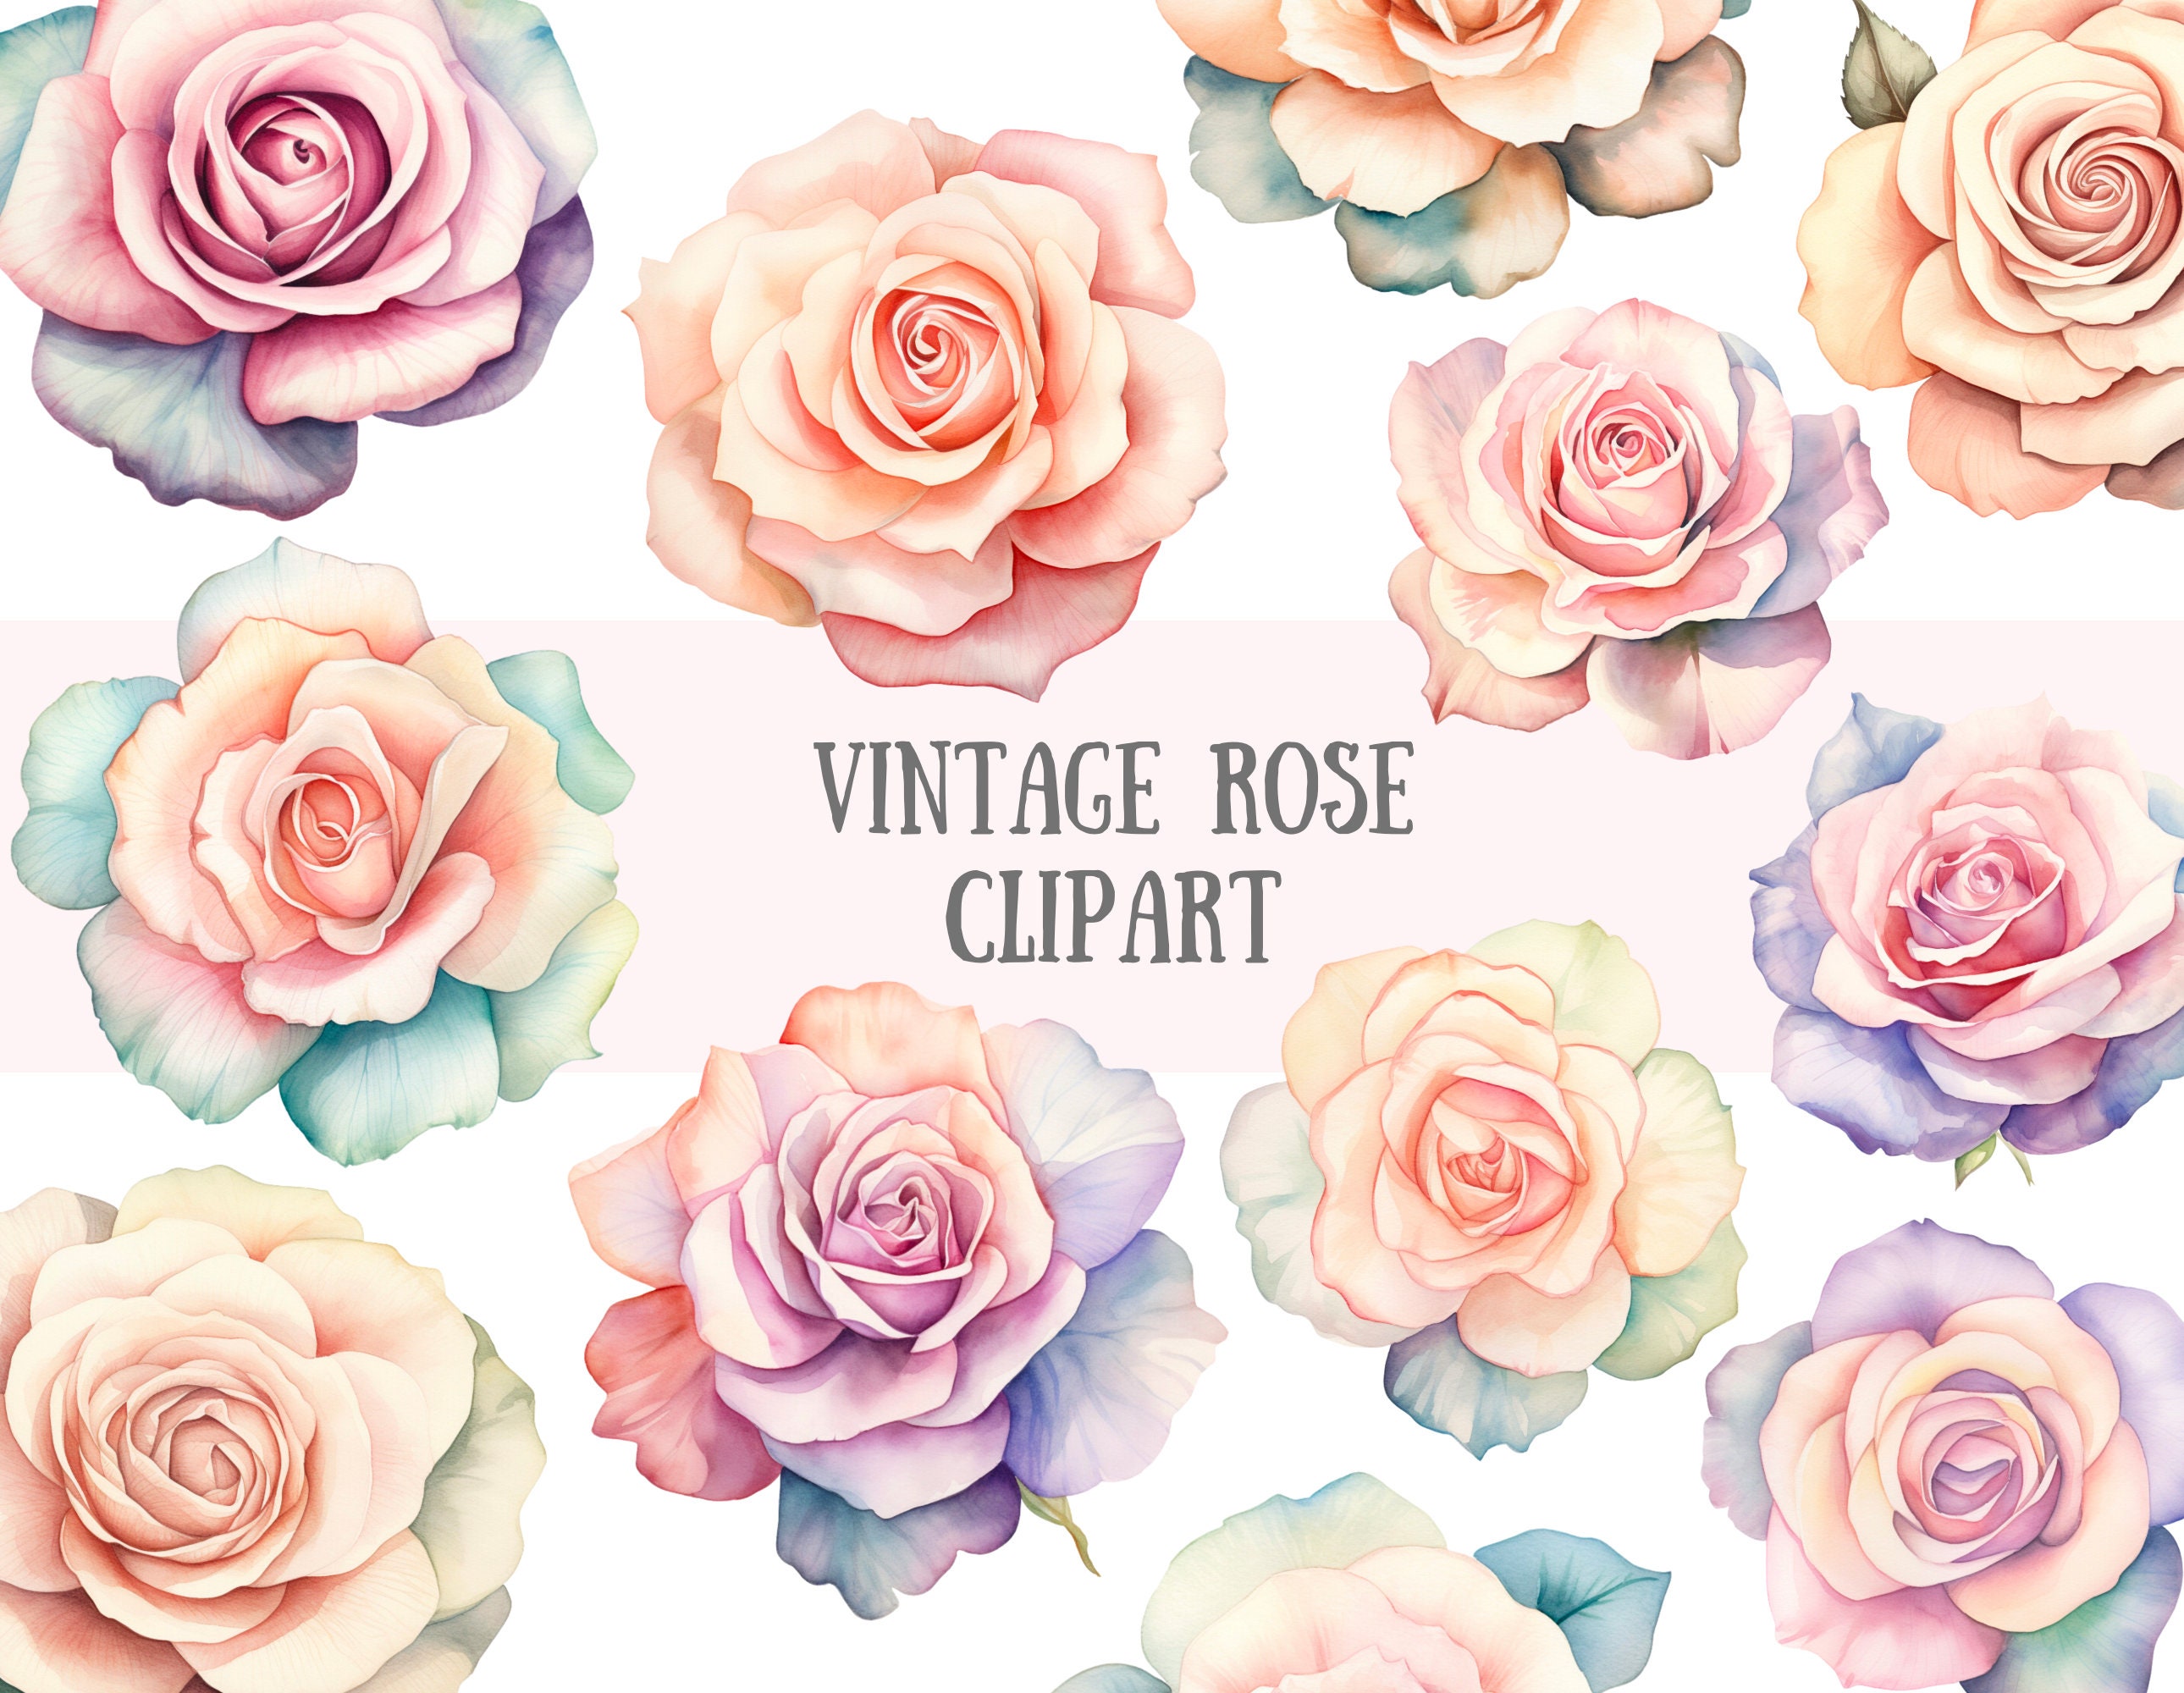 8 Vintage Rosebud Pictures! - The Graphics Fairy